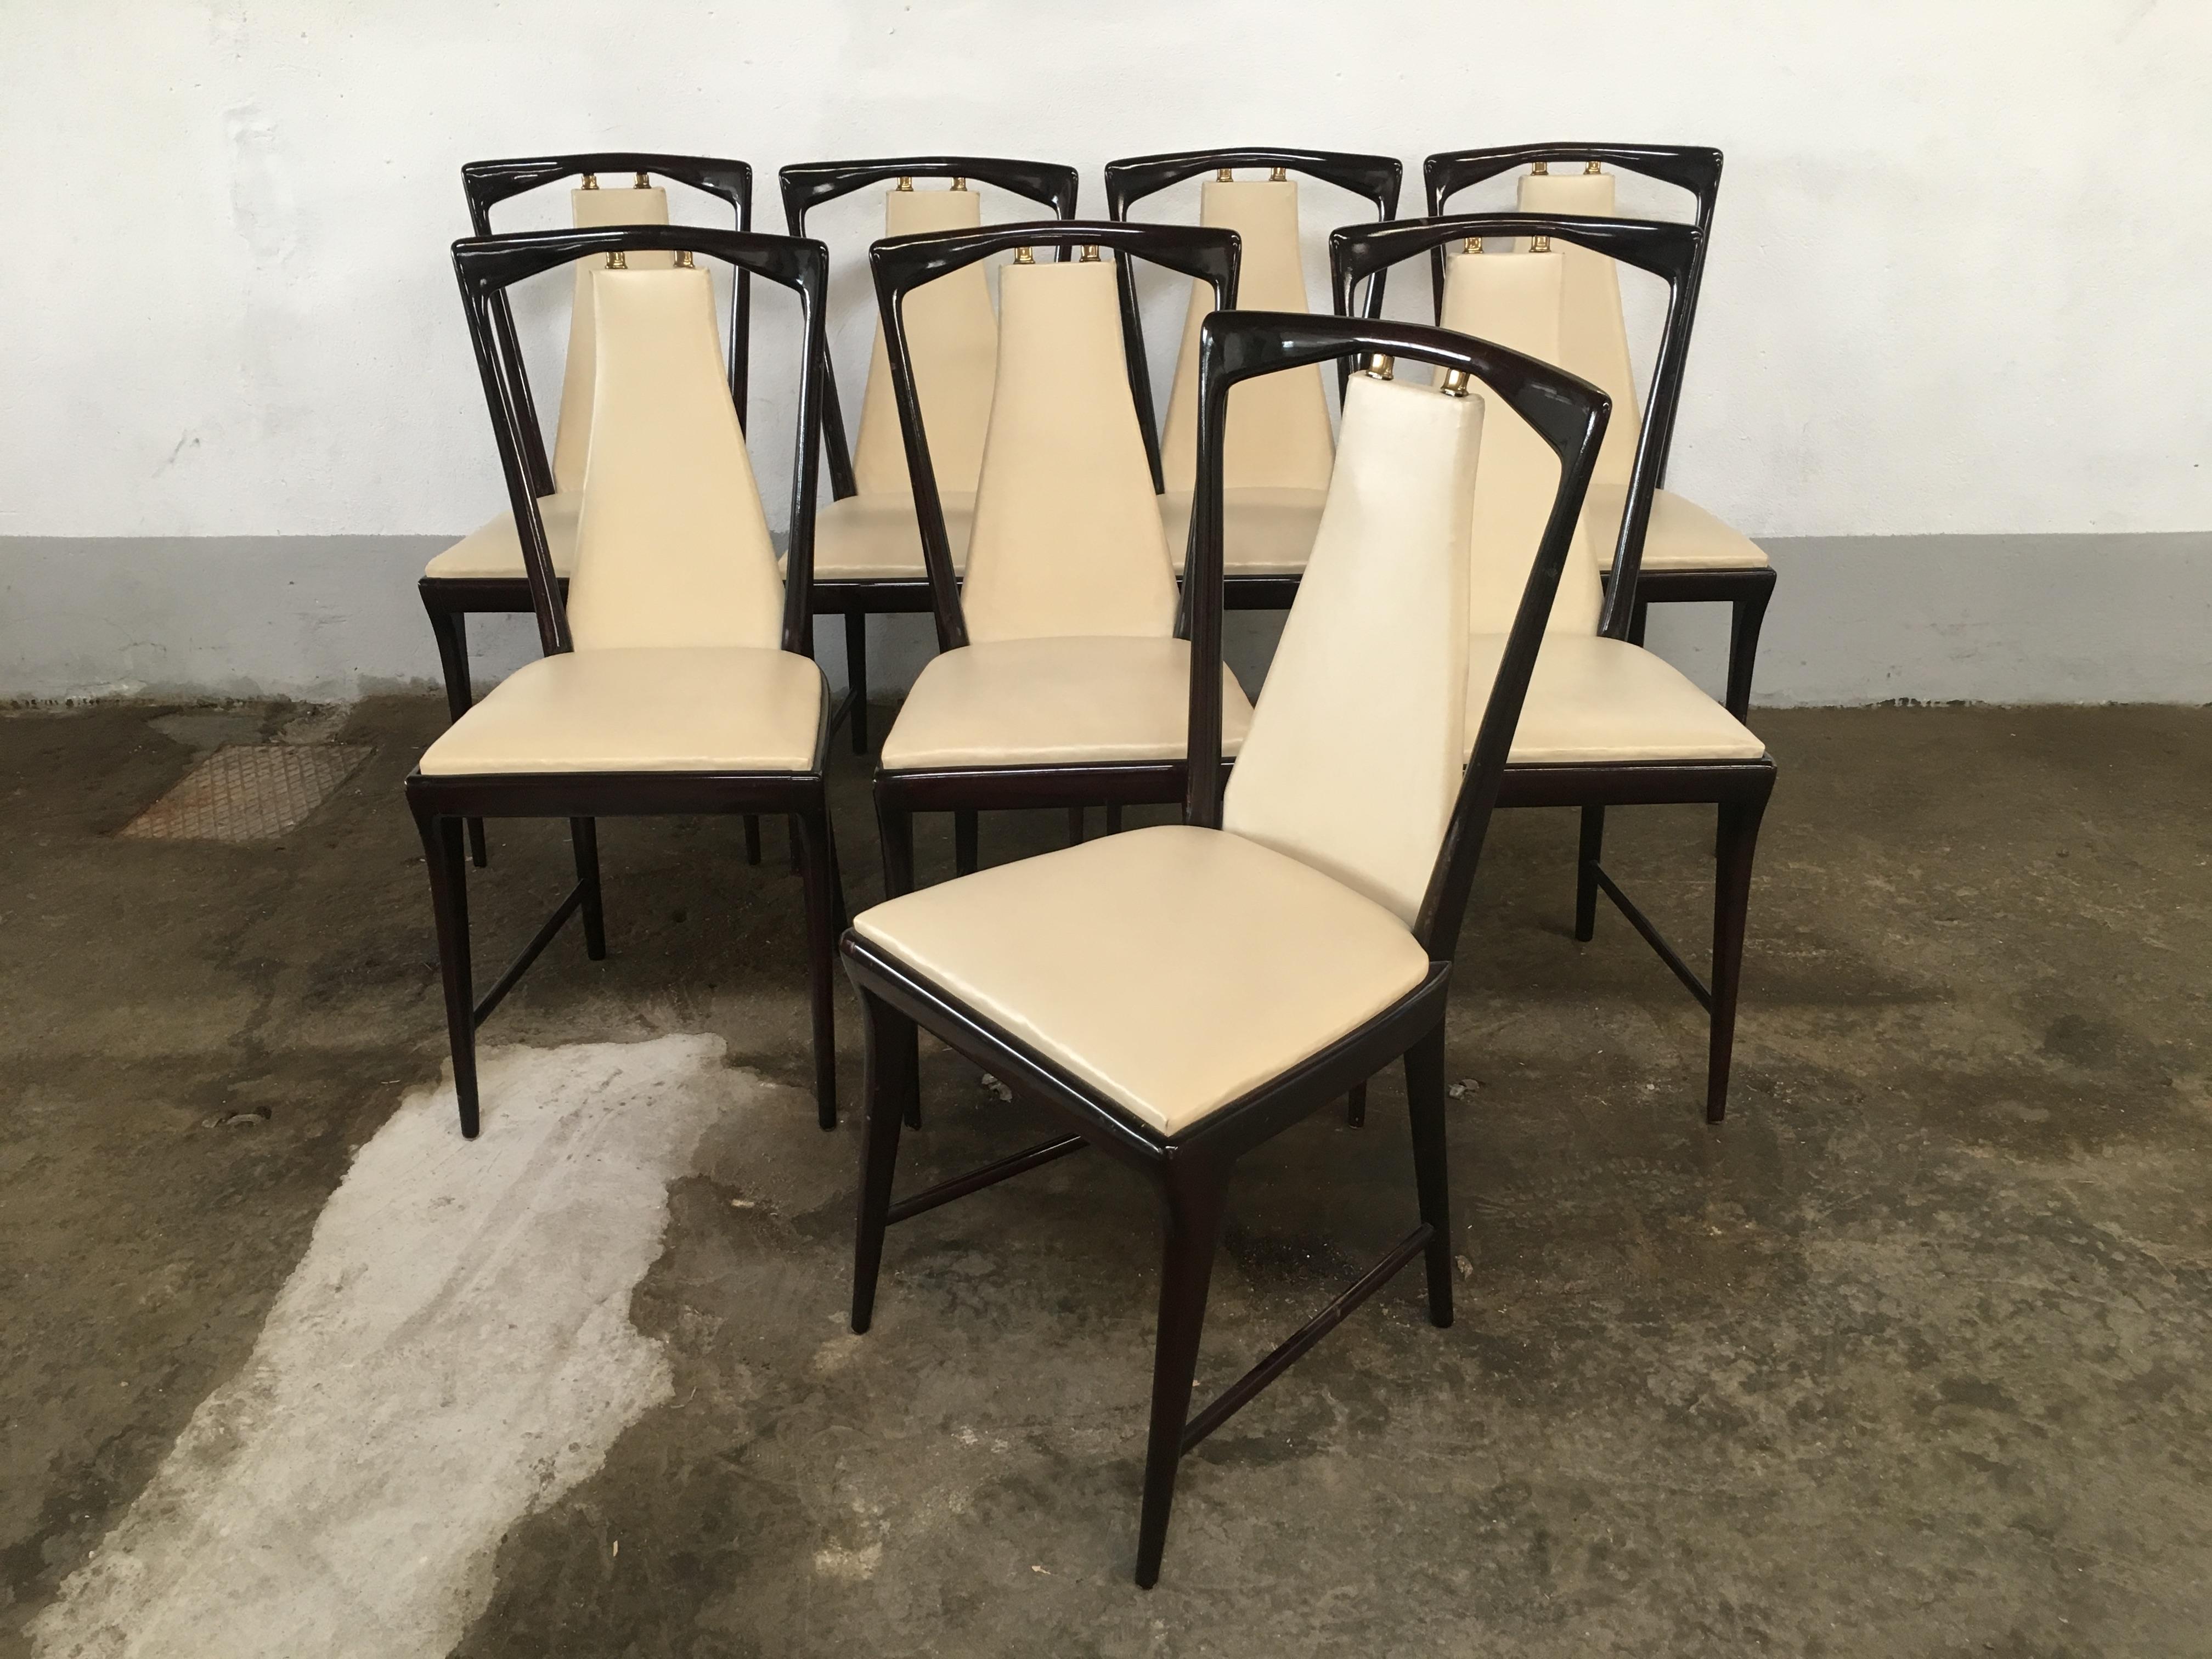 Mid-Century Modern set of 8 Osvaldo Borsani mahogany and faux leather Italian dining chairs with brass details from 1950s
The chairs can become a set together with their Dining Table and are a part of a complete dining room set made by Mobilificio